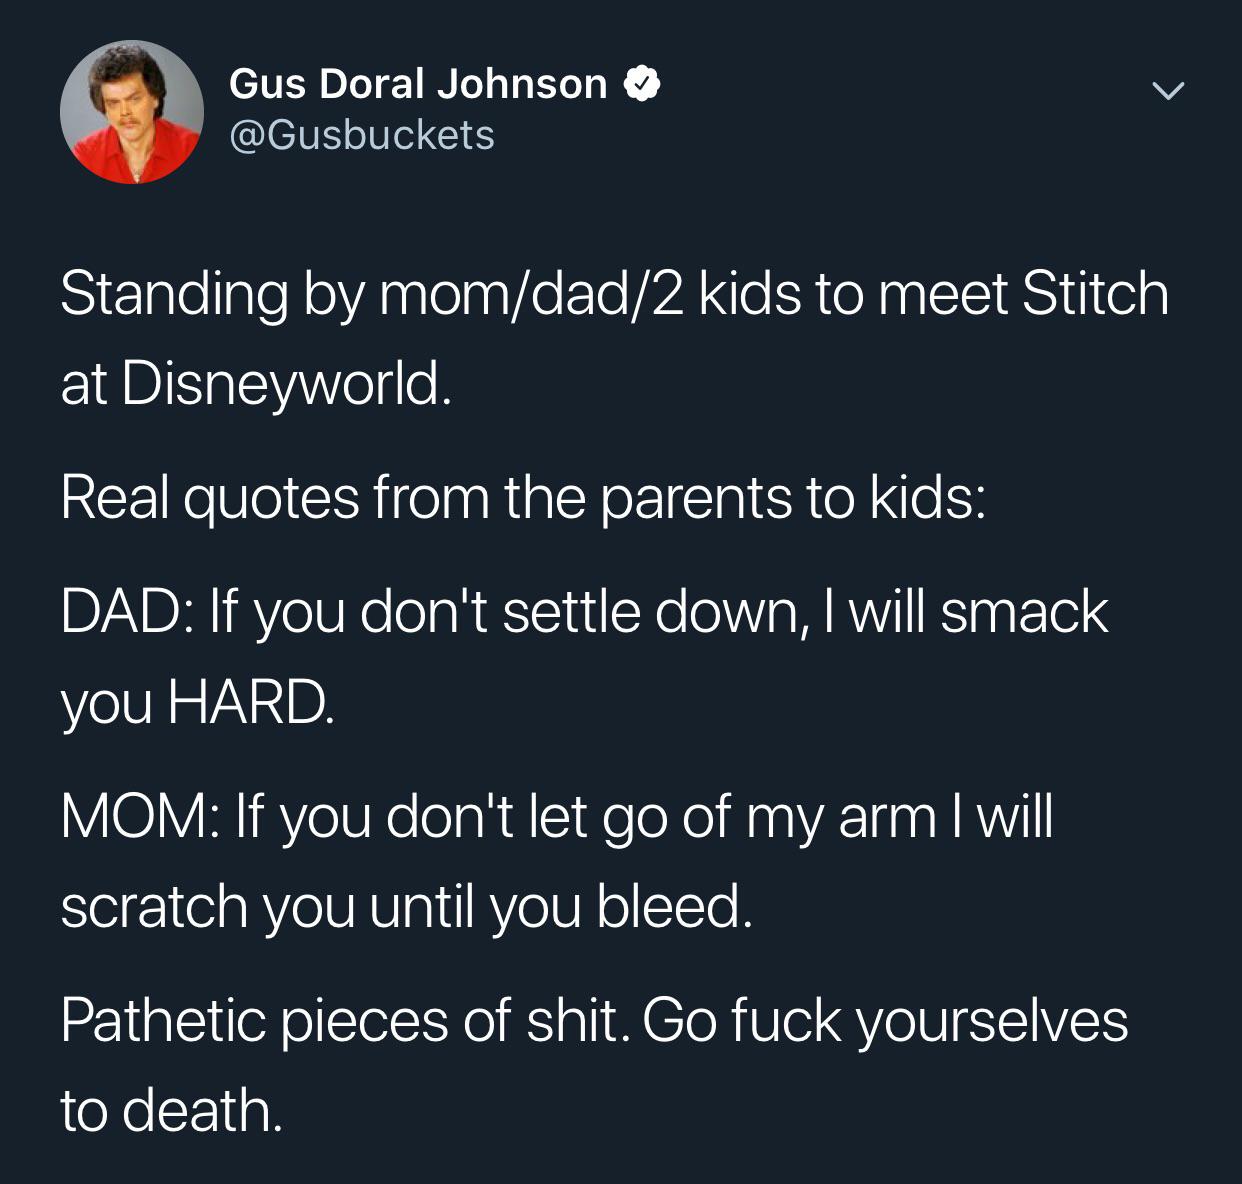 Gus Doral Johnson Standing by momdad2 kids to meet Stitch at Disneyworld. Real quotes from the parents to kids Dad If you don't settle down, I will smack you Hard. Mom If you don't let go of my arm I will scratch you until you bleed. Pathetic